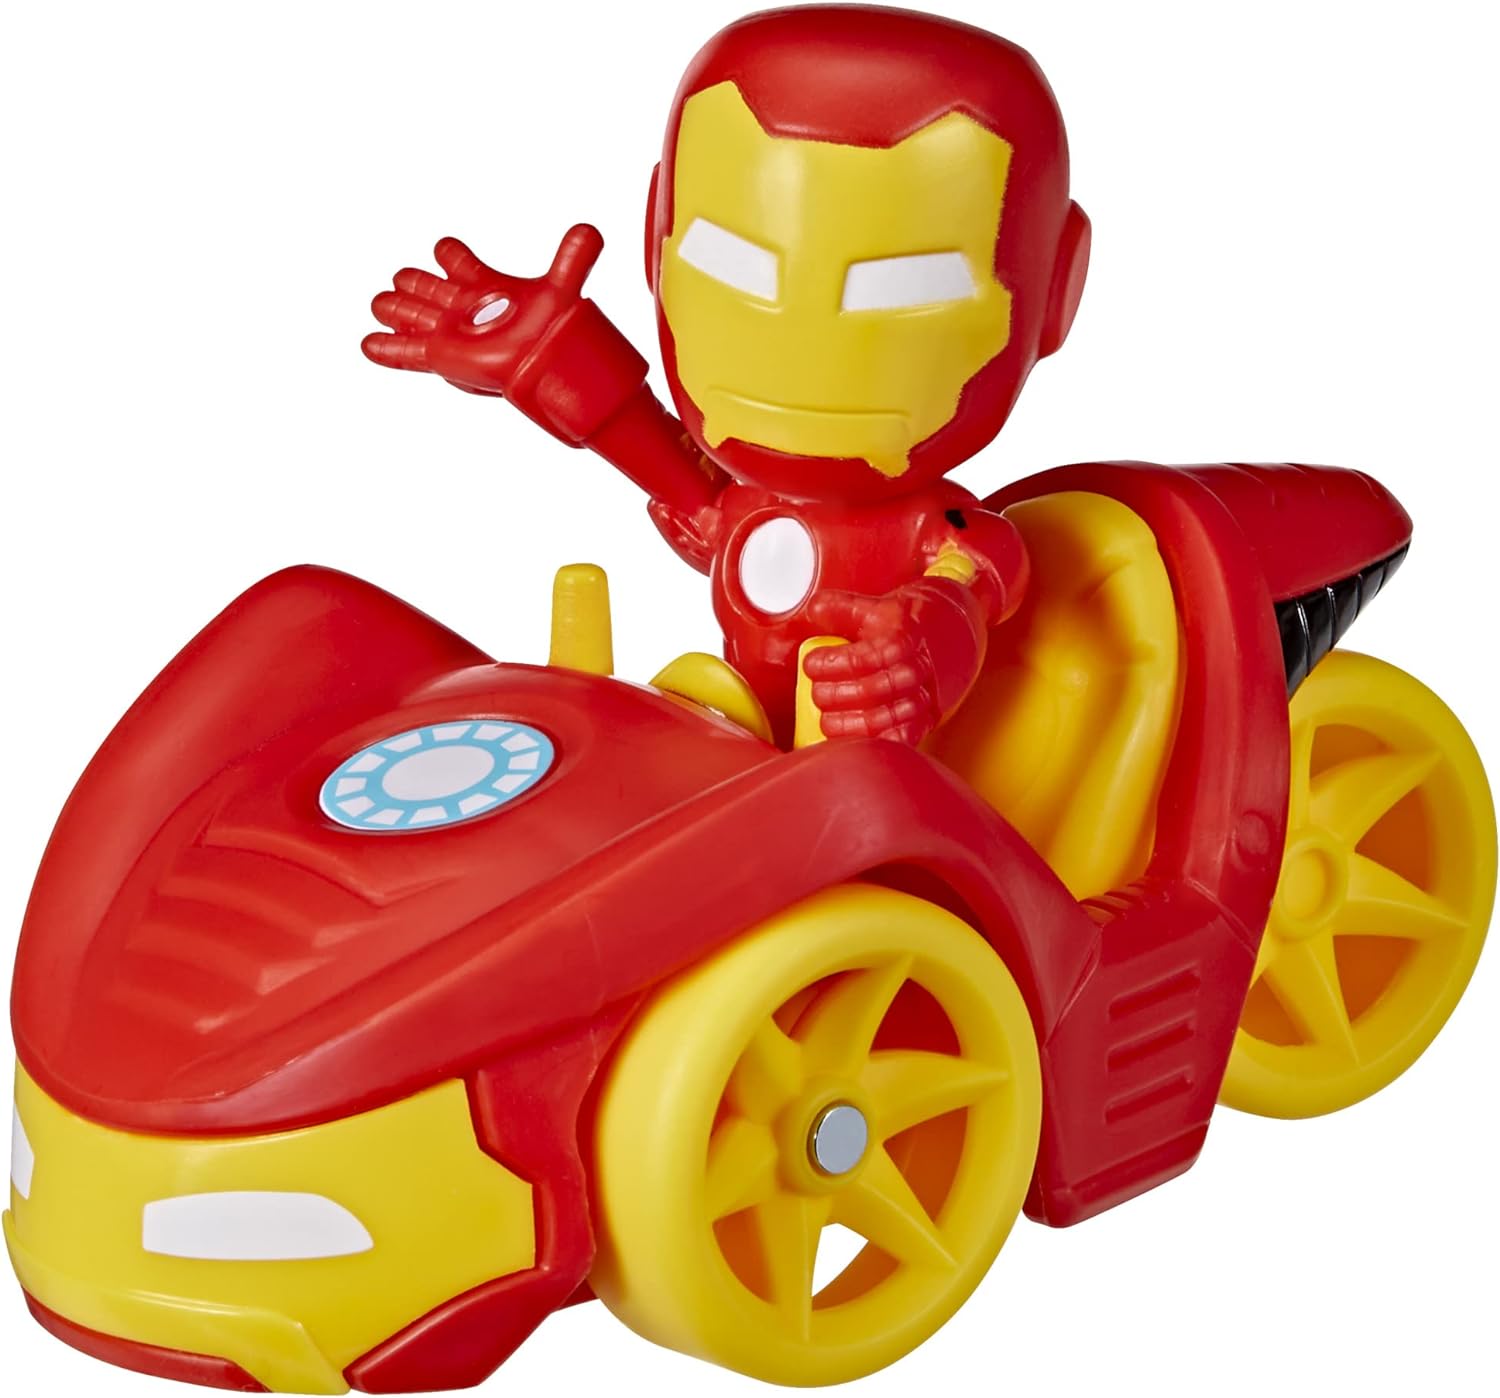 Spidey and His Amazing Friends Hasbro Marvel Iron Man Action Figure and Iron Racer Vehicle, Iron Man Toy for Kids Ages 3 and Up